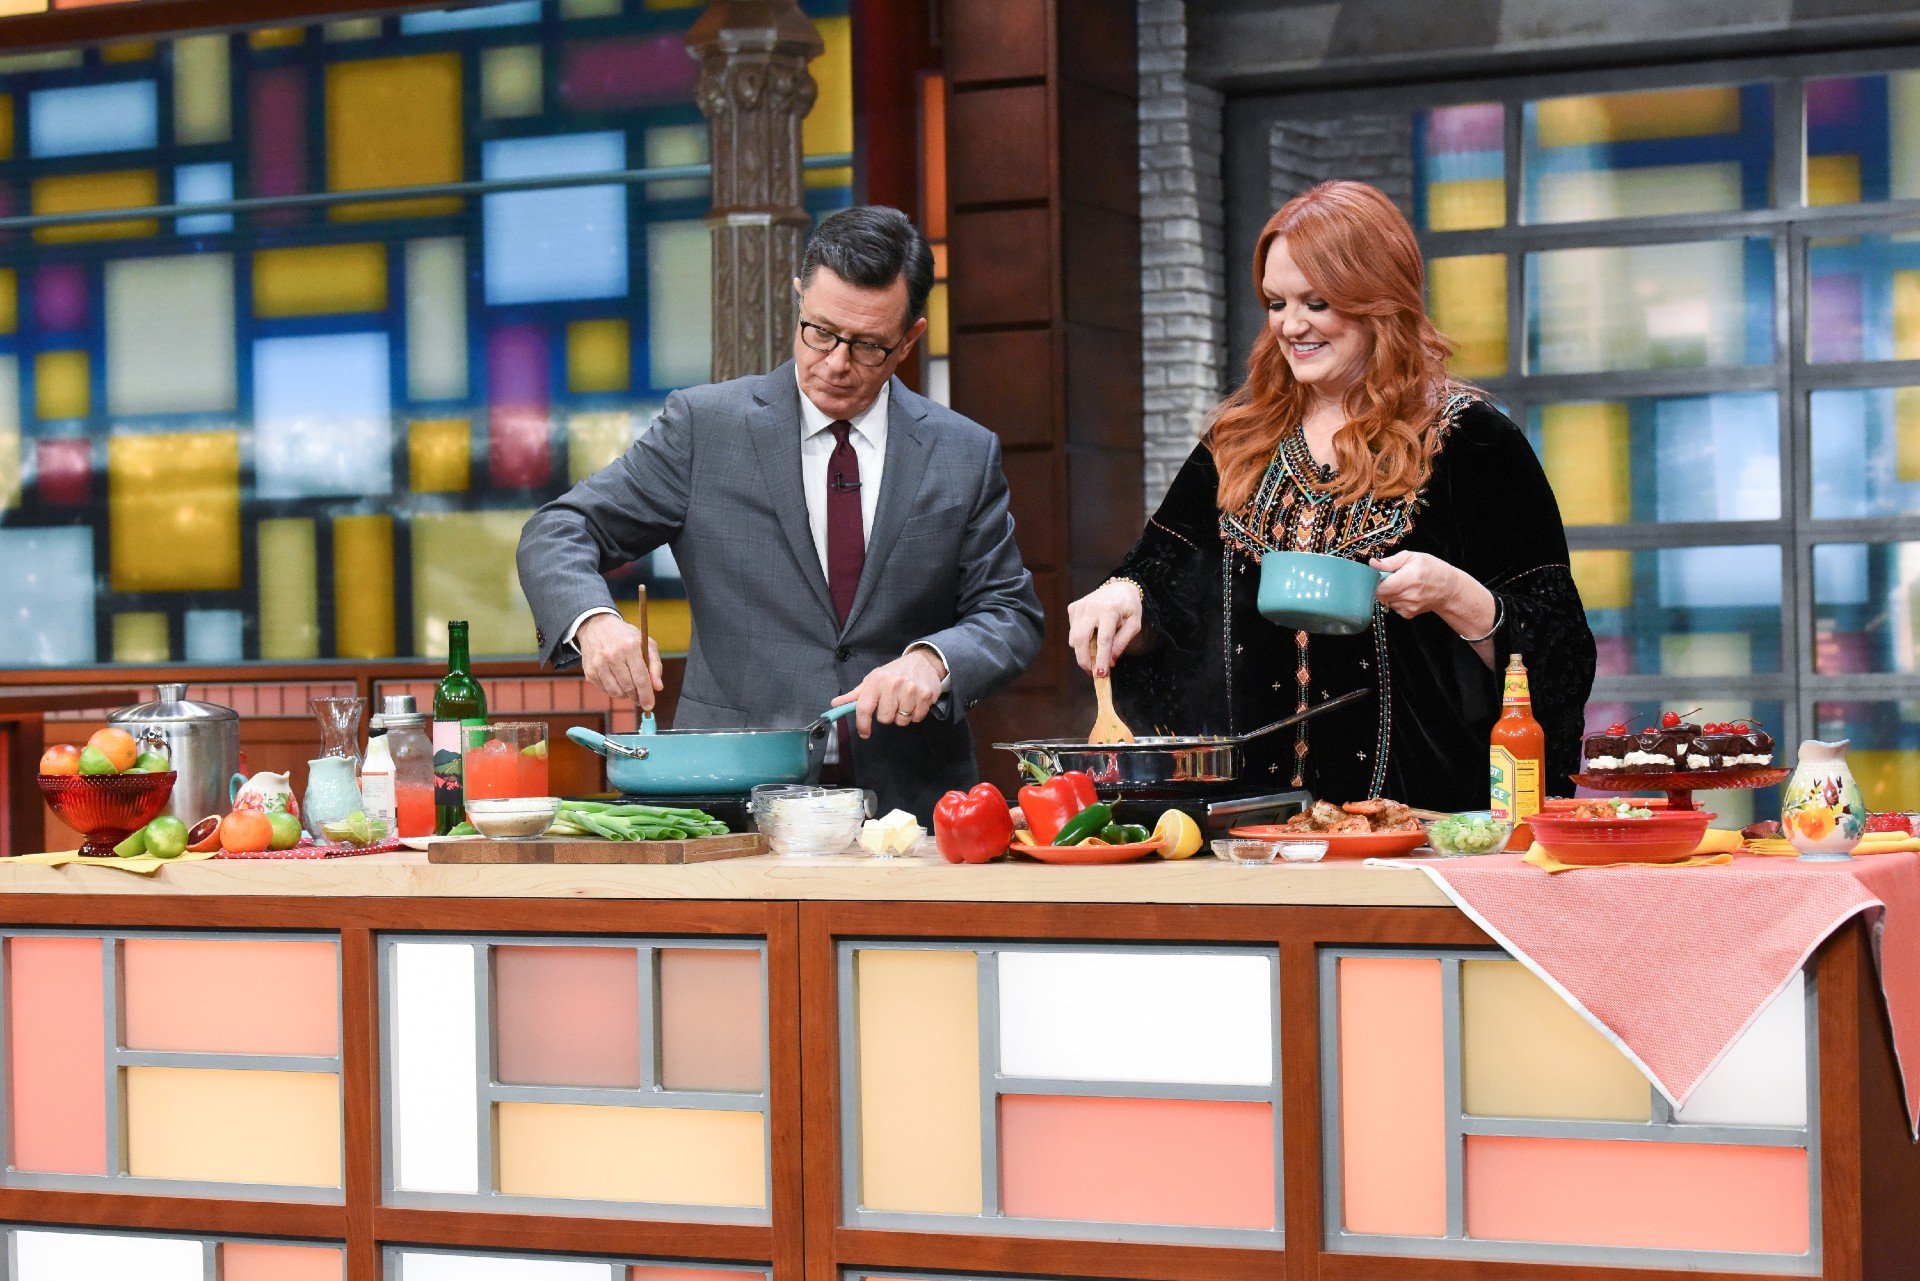 Ree Drummond smiles and holds a blue pot while Stephen Colbert stirs food